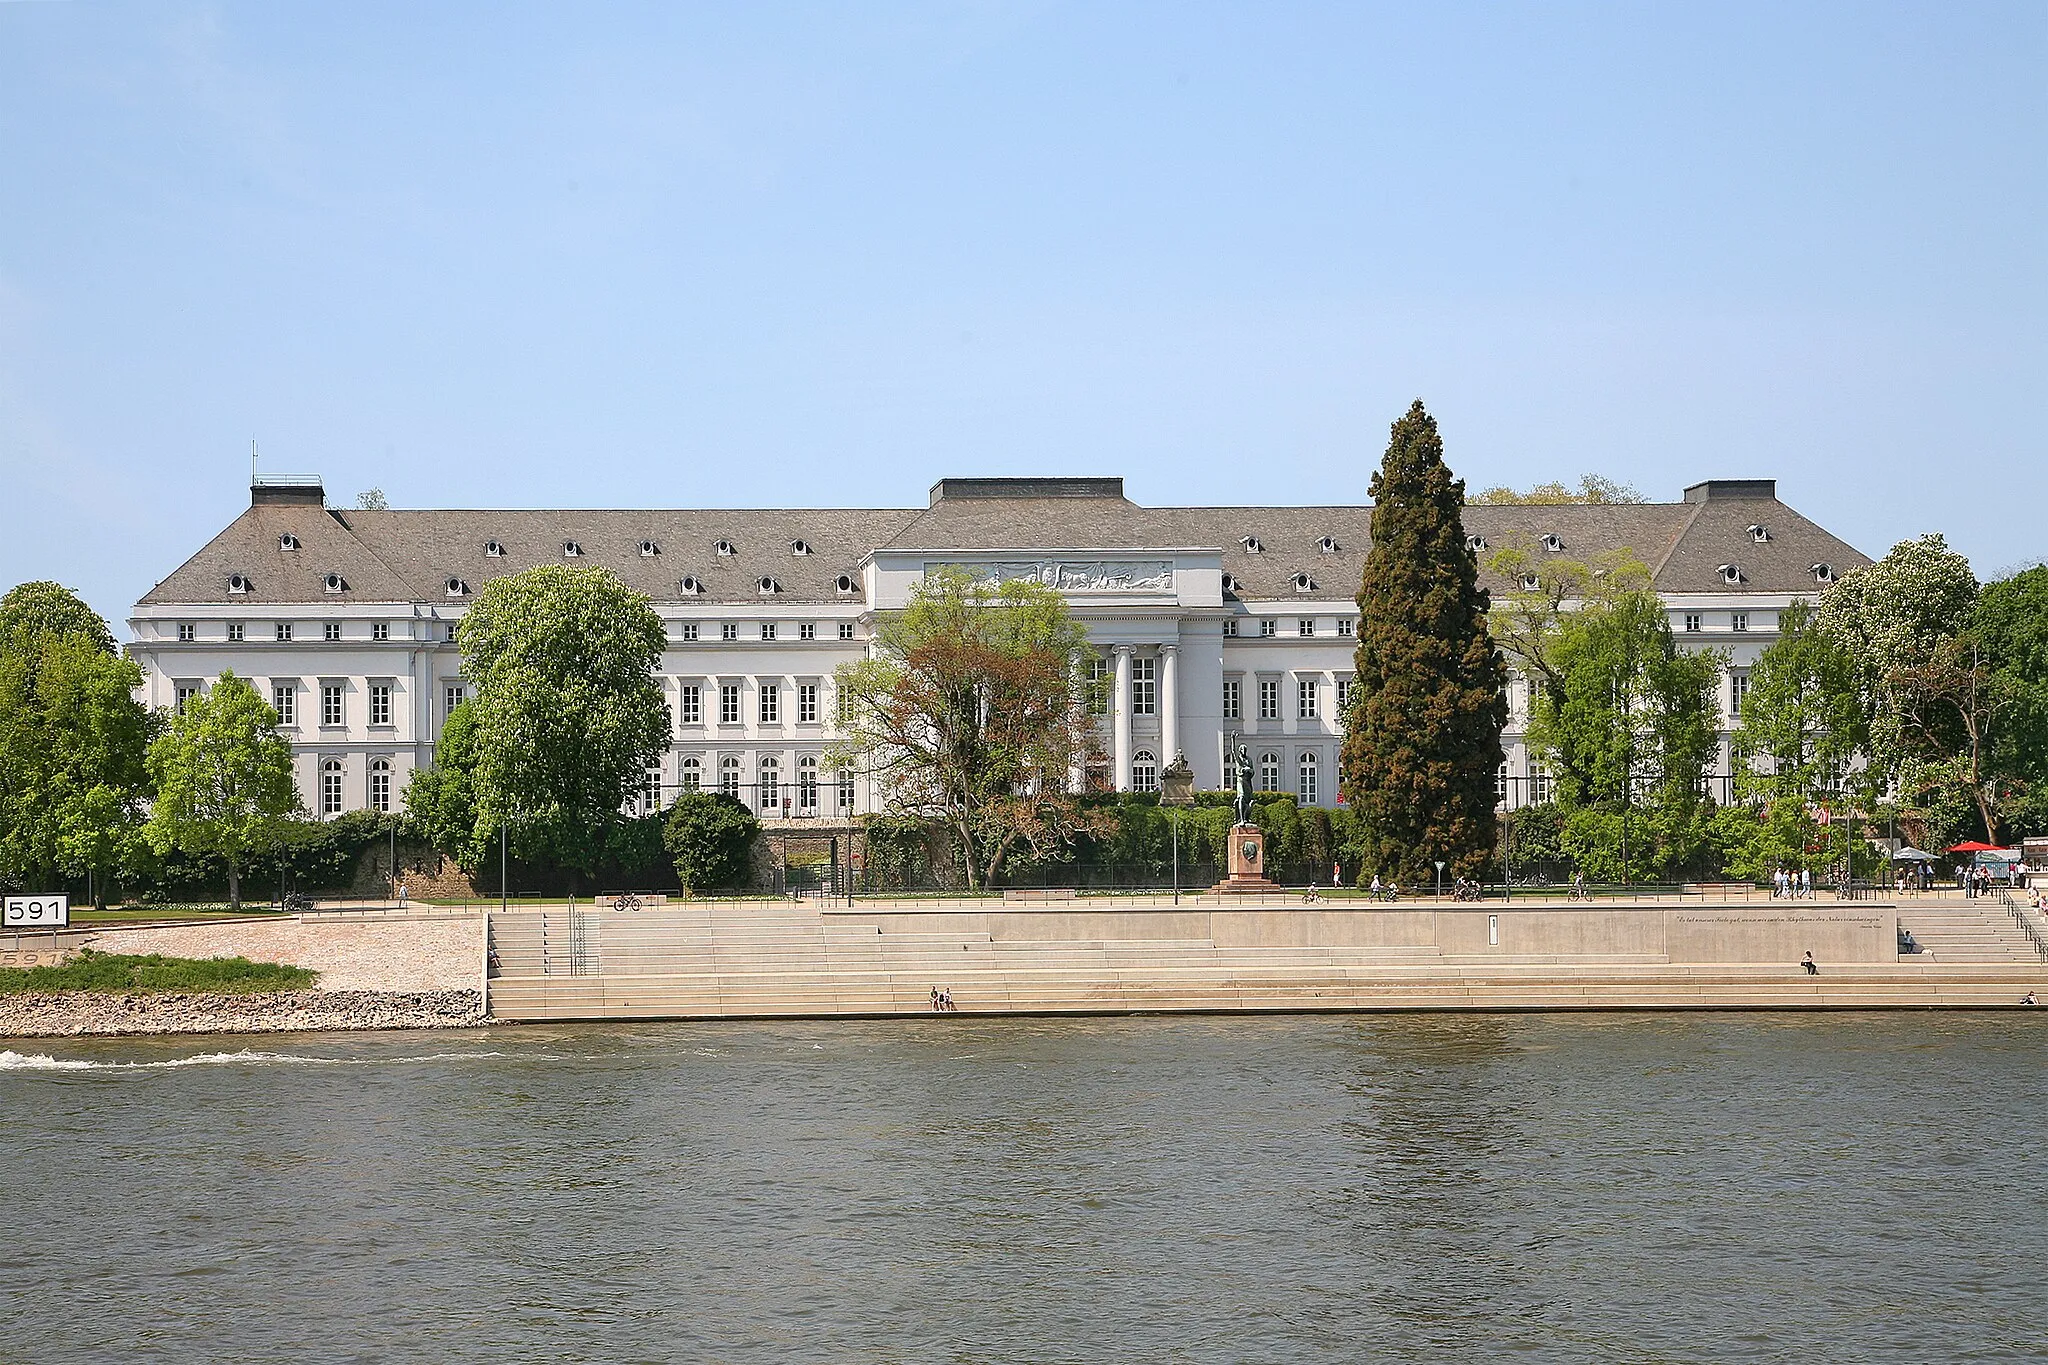 Photo showing: The "Kurfürstliche Schloss" in Koblenz was built between 1777 and 1793 in the style of French early classicalism